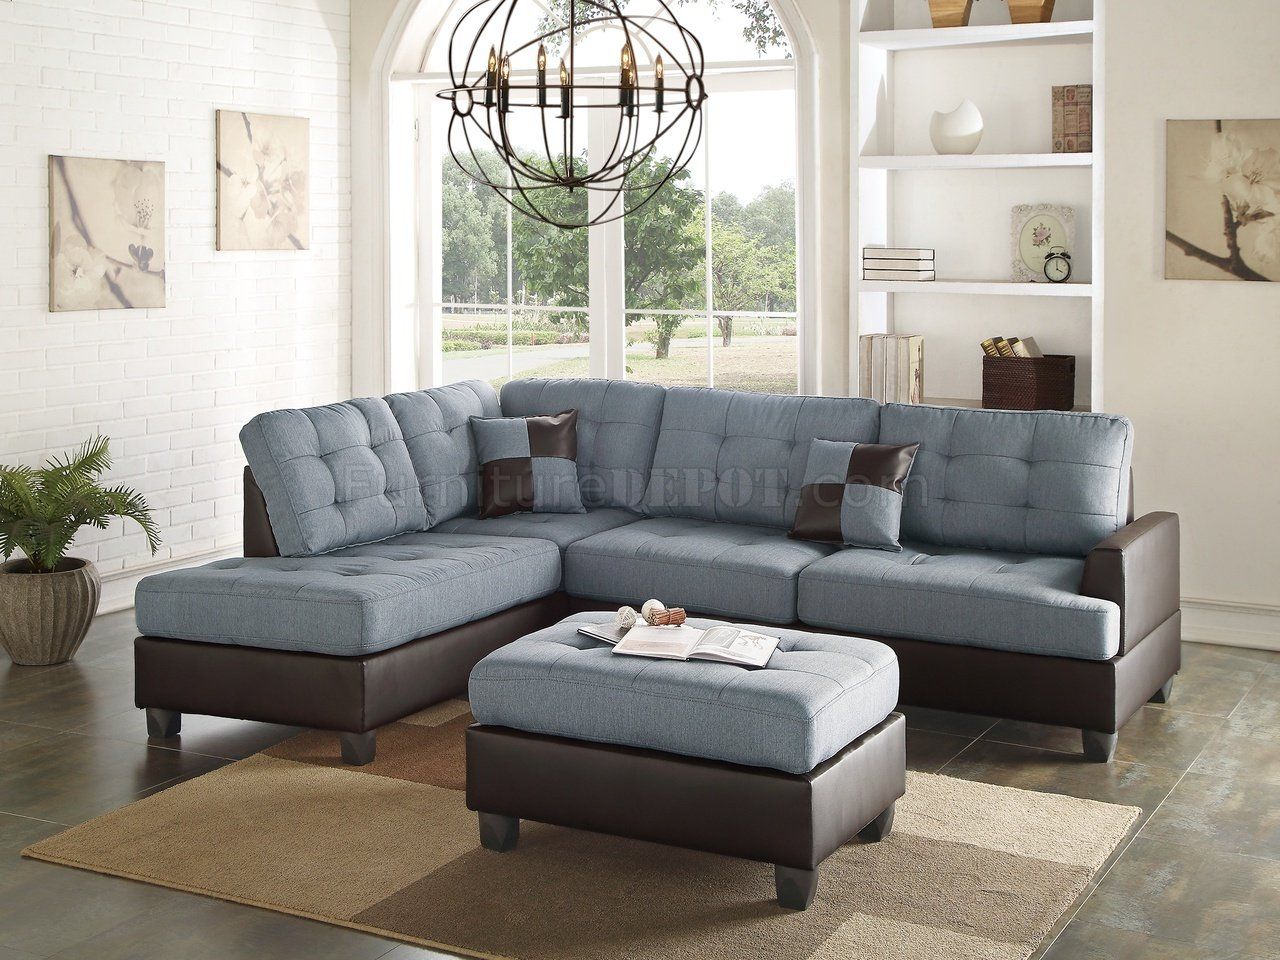 F6858 Sectional Sofa 3Pc In Grey Fabricboss Pertaining To Sectional Sofas In Gray (View 2 of 15)